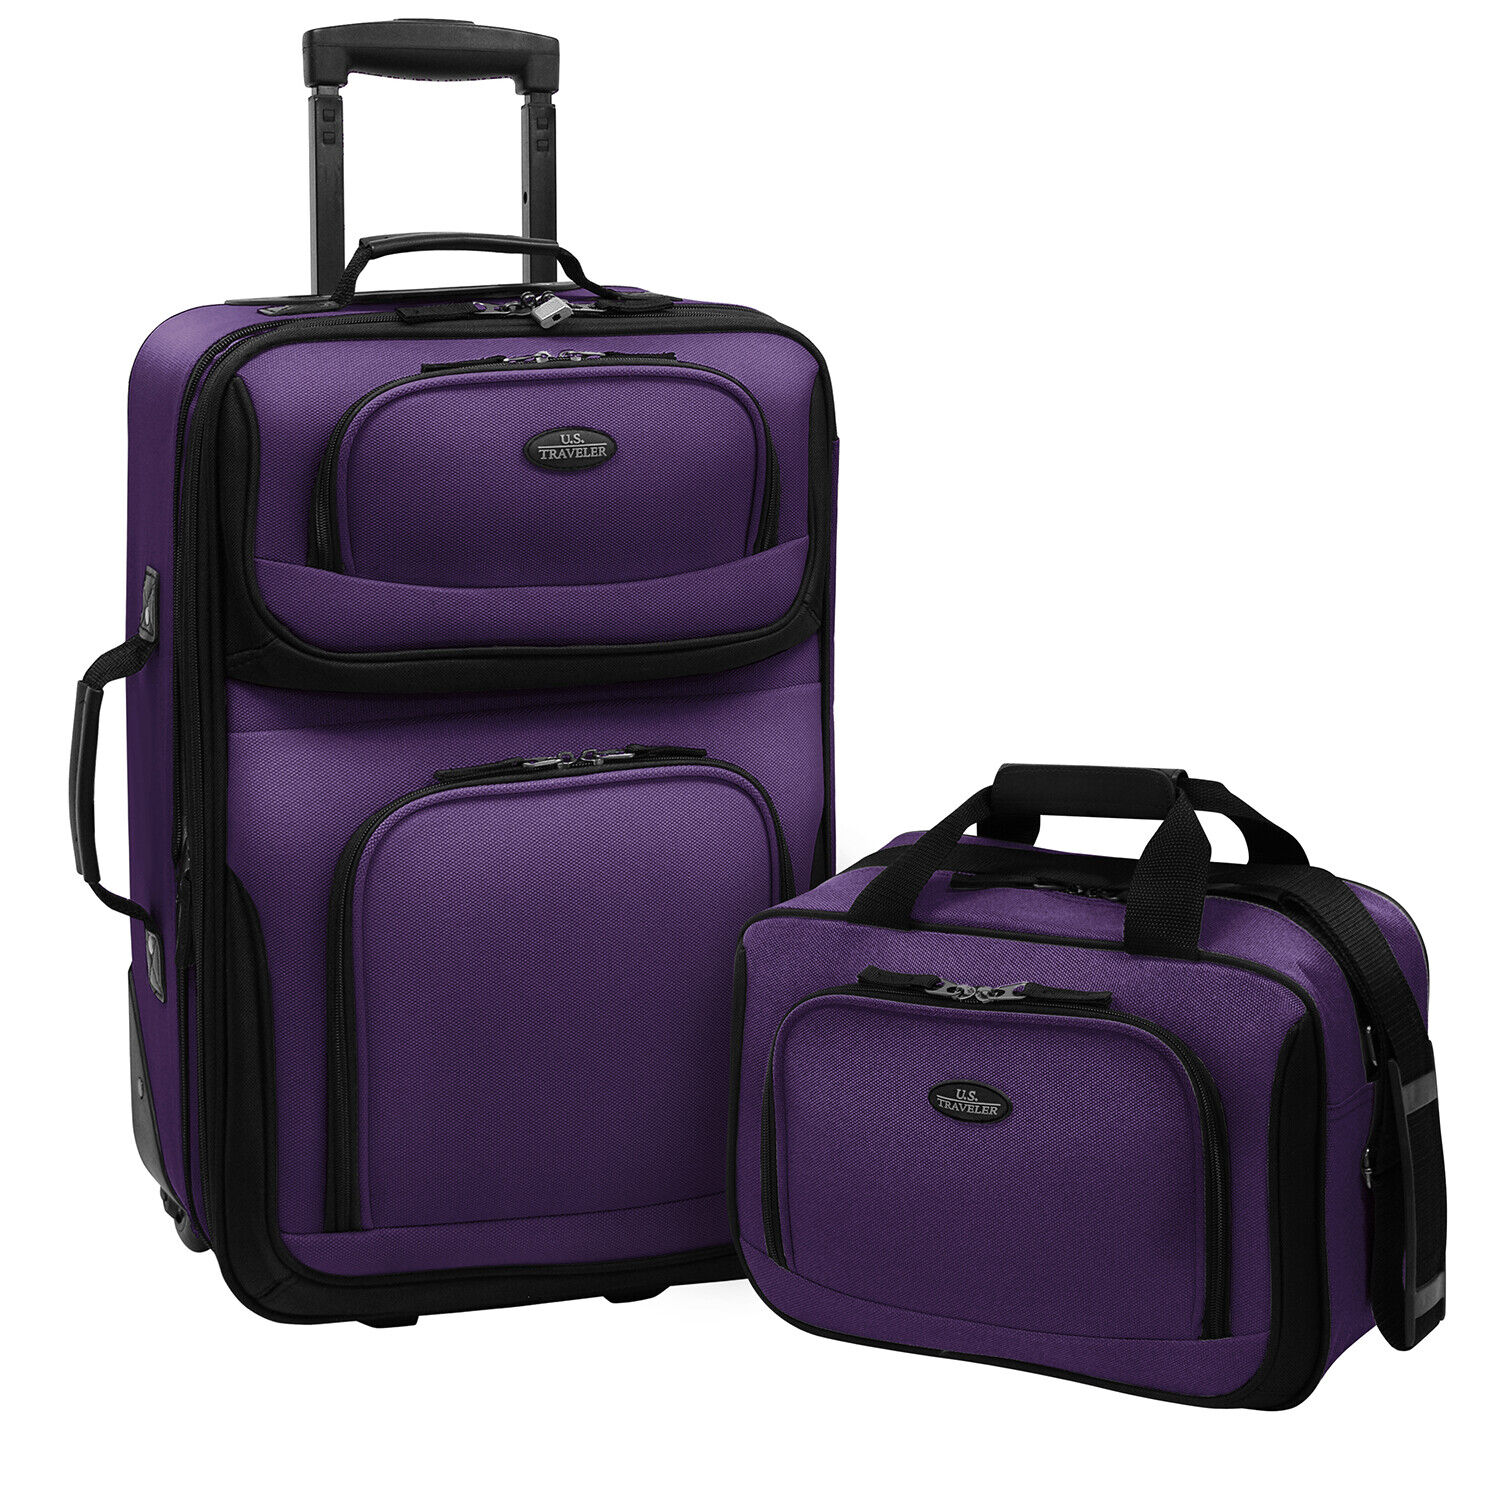 Carry-on Rio Purple Rolling Lightweight Expandable Suitcase Tote Bag Luggage Set Traveler's Choice US5600L